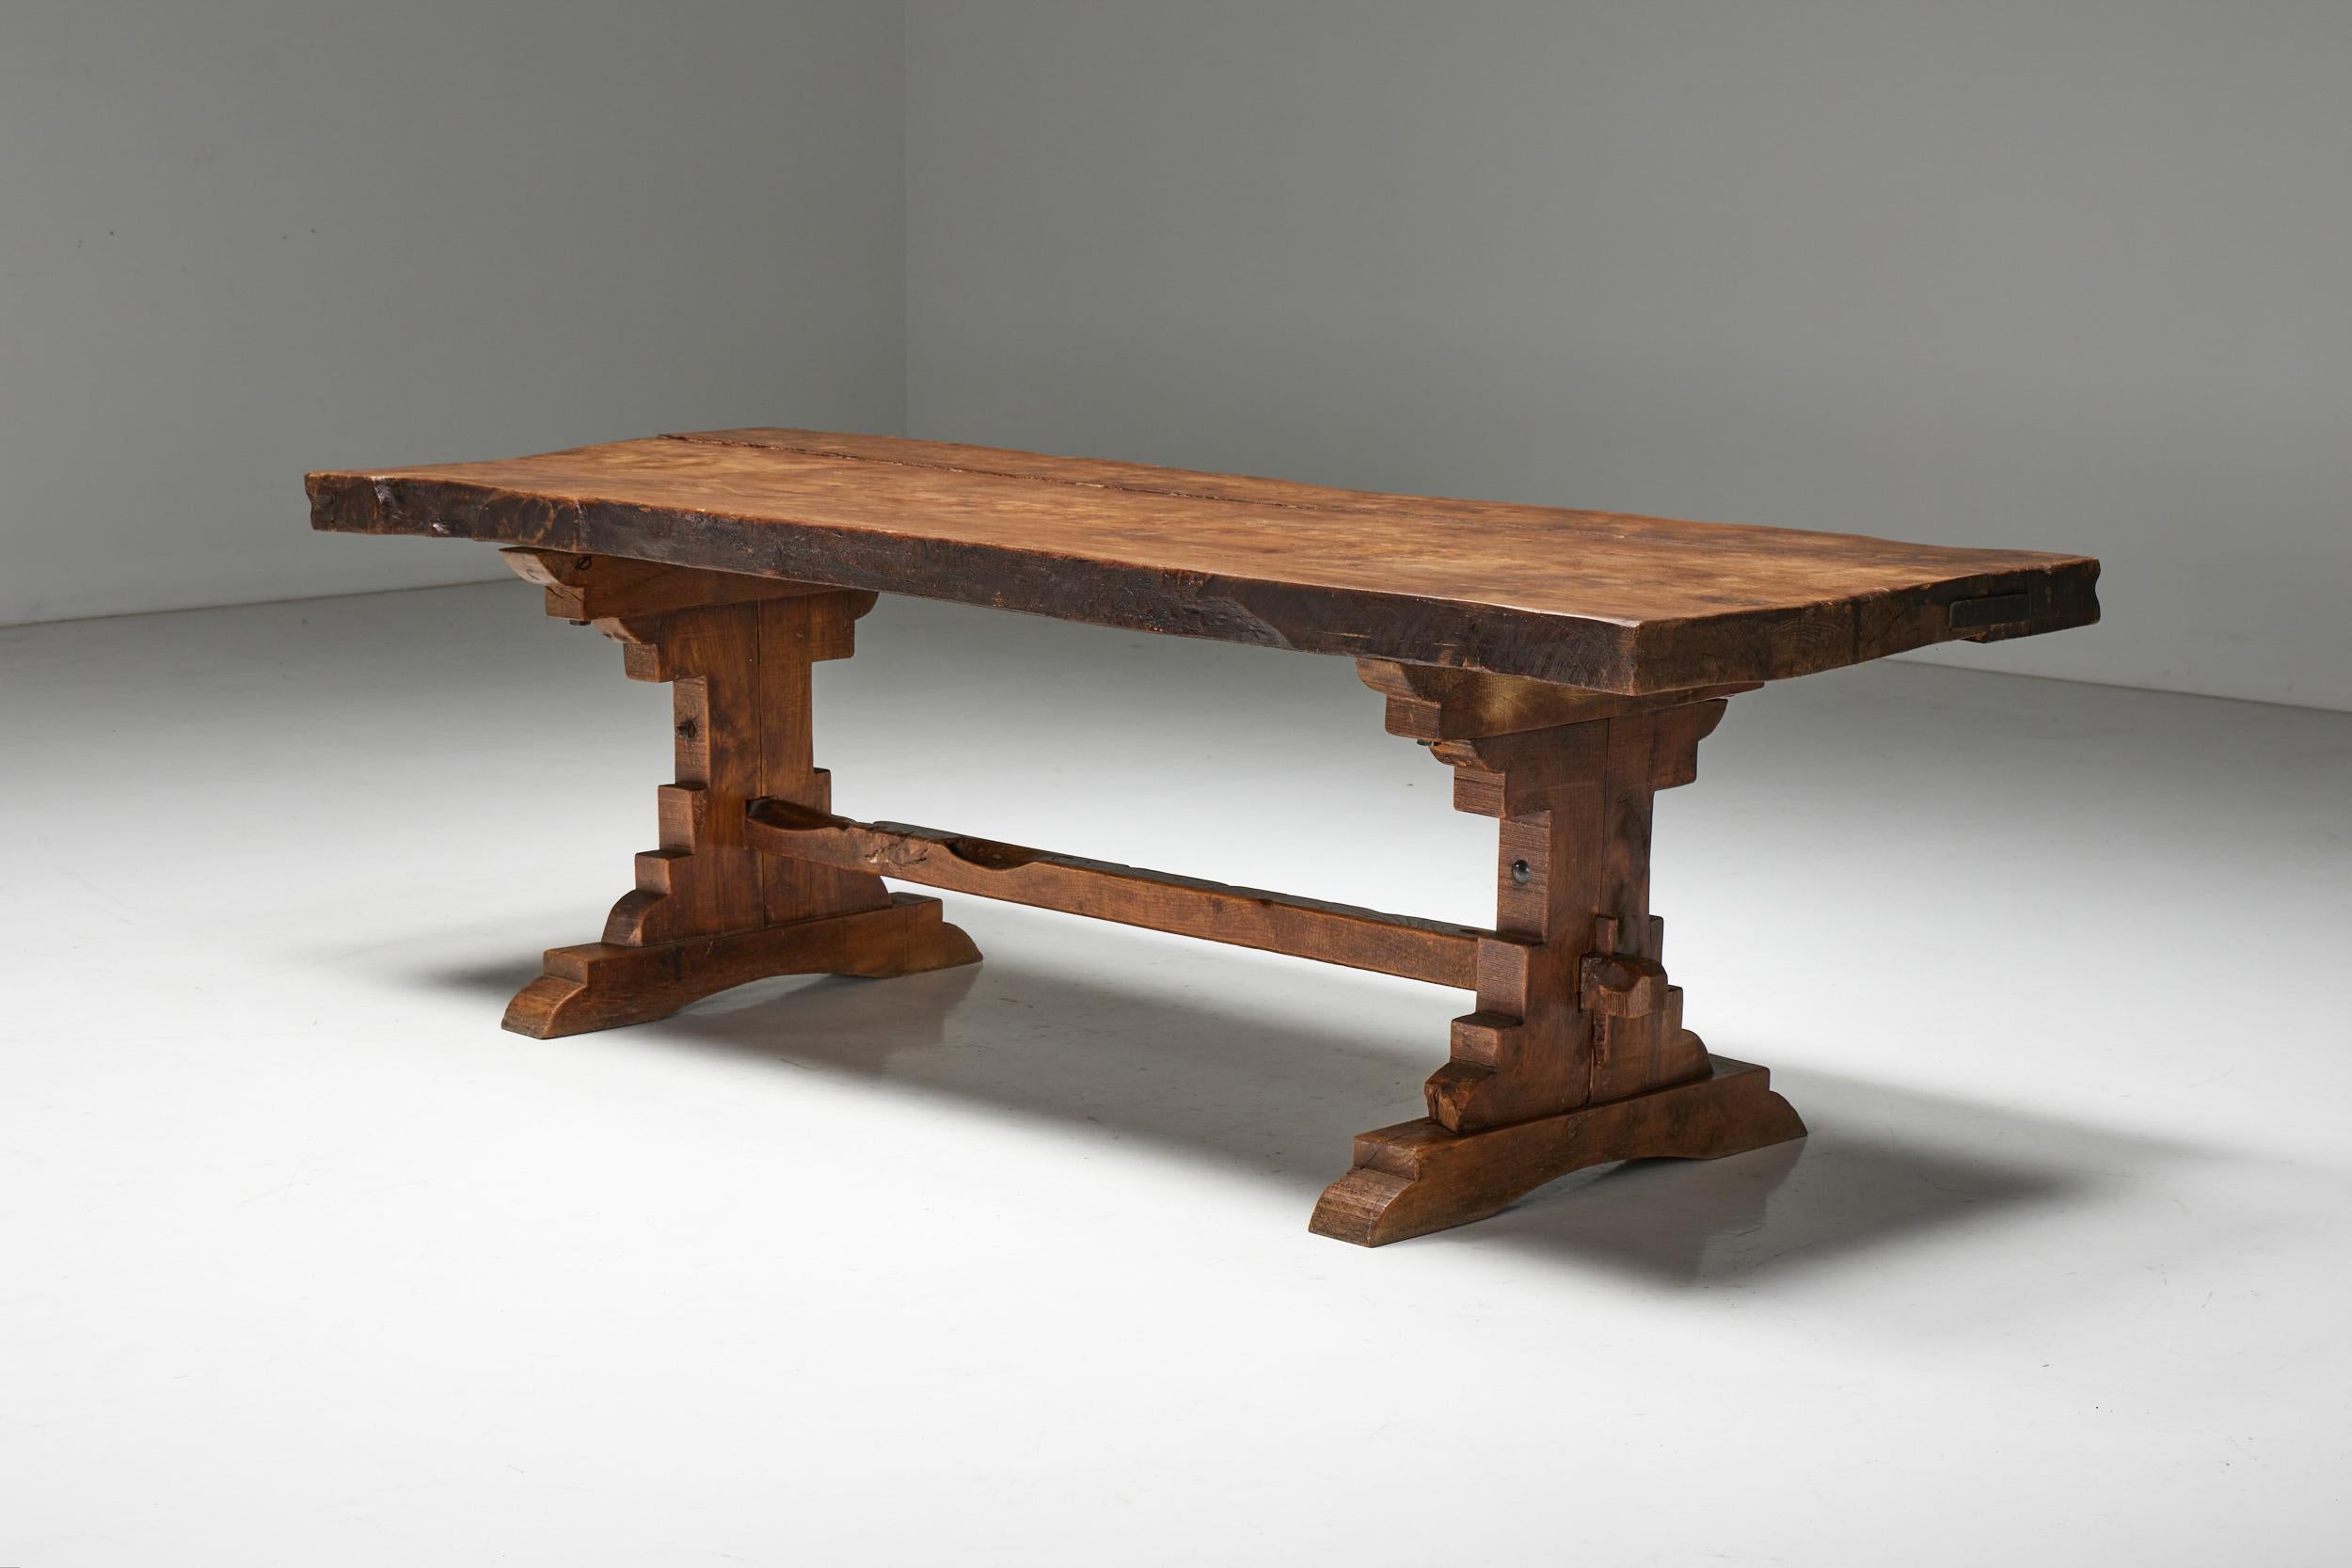 Monoxylite; Dining Table; Travail Populaire; France; Wabi Sabi; 19th Century; Rustic; Art Populaire; Wooden Table; Console Table; 

19th-century dining table, featuring a unique tabletop pattern of solid oak wood. The handcrafted sturdy table legs